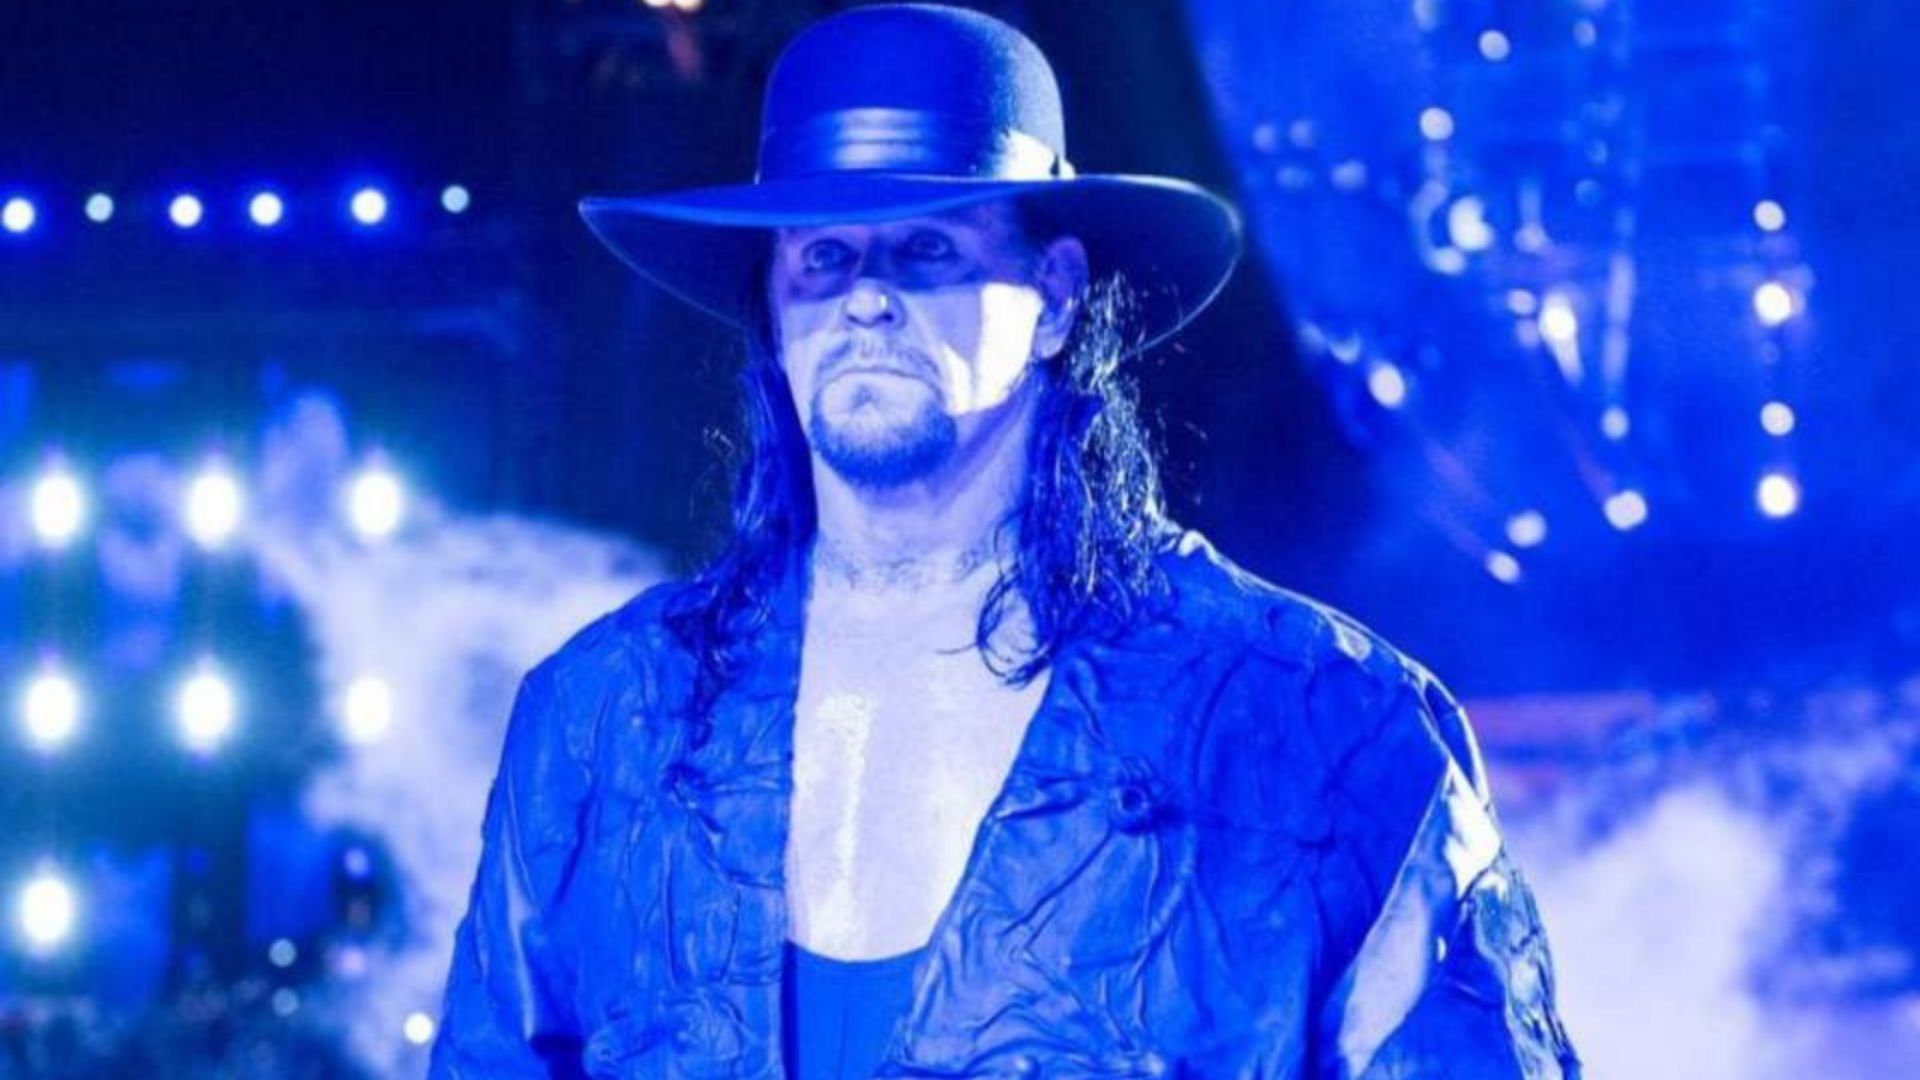 Taker has been public about his love for bands like AC/DC